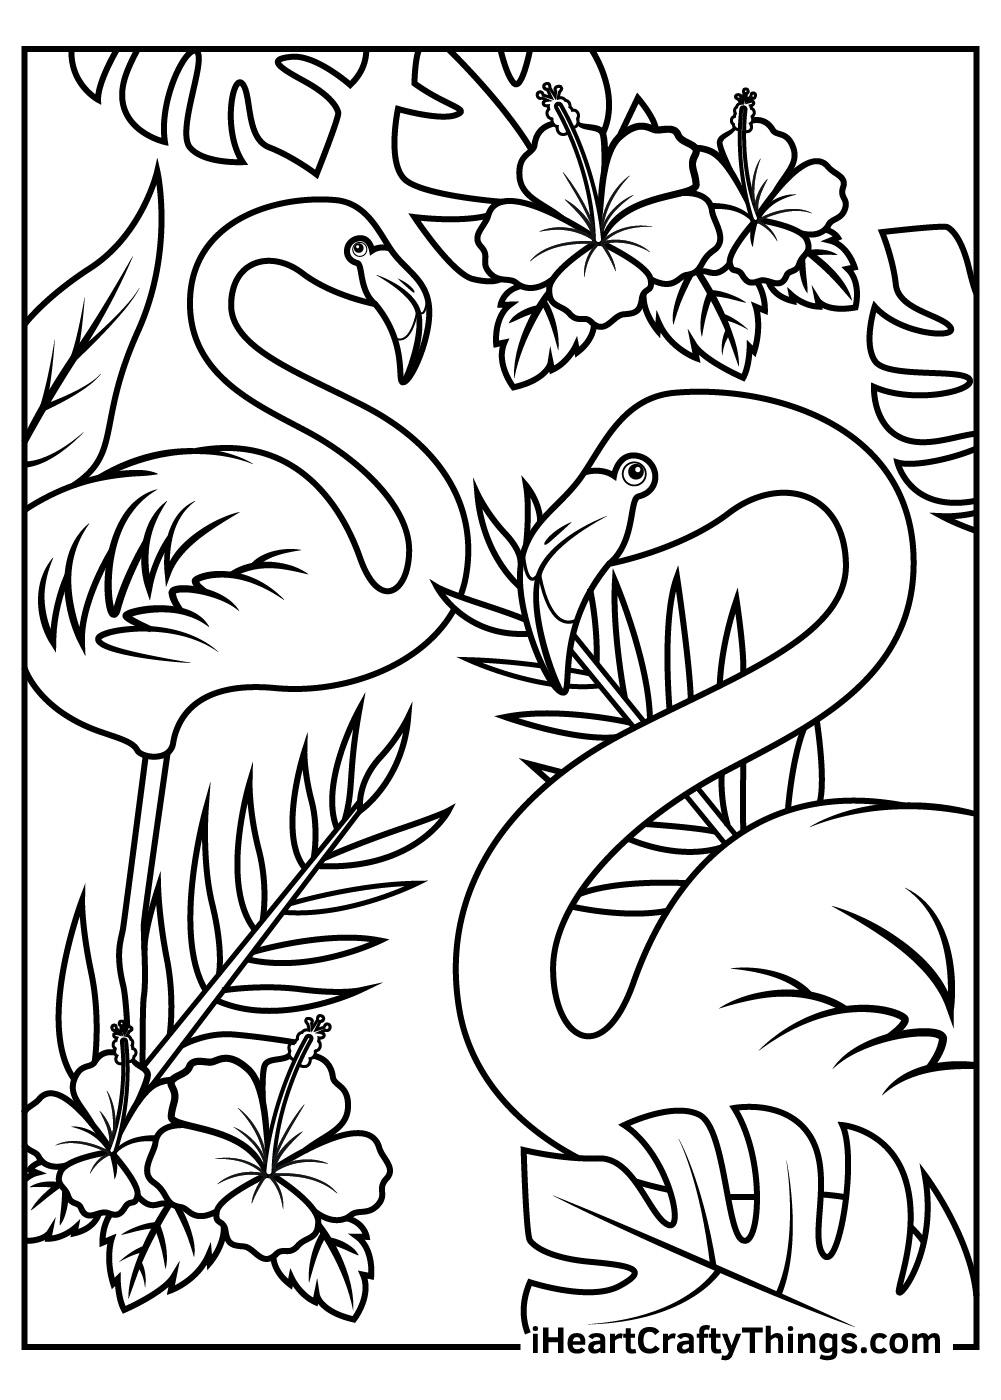 Flamingos coloring pages free printables